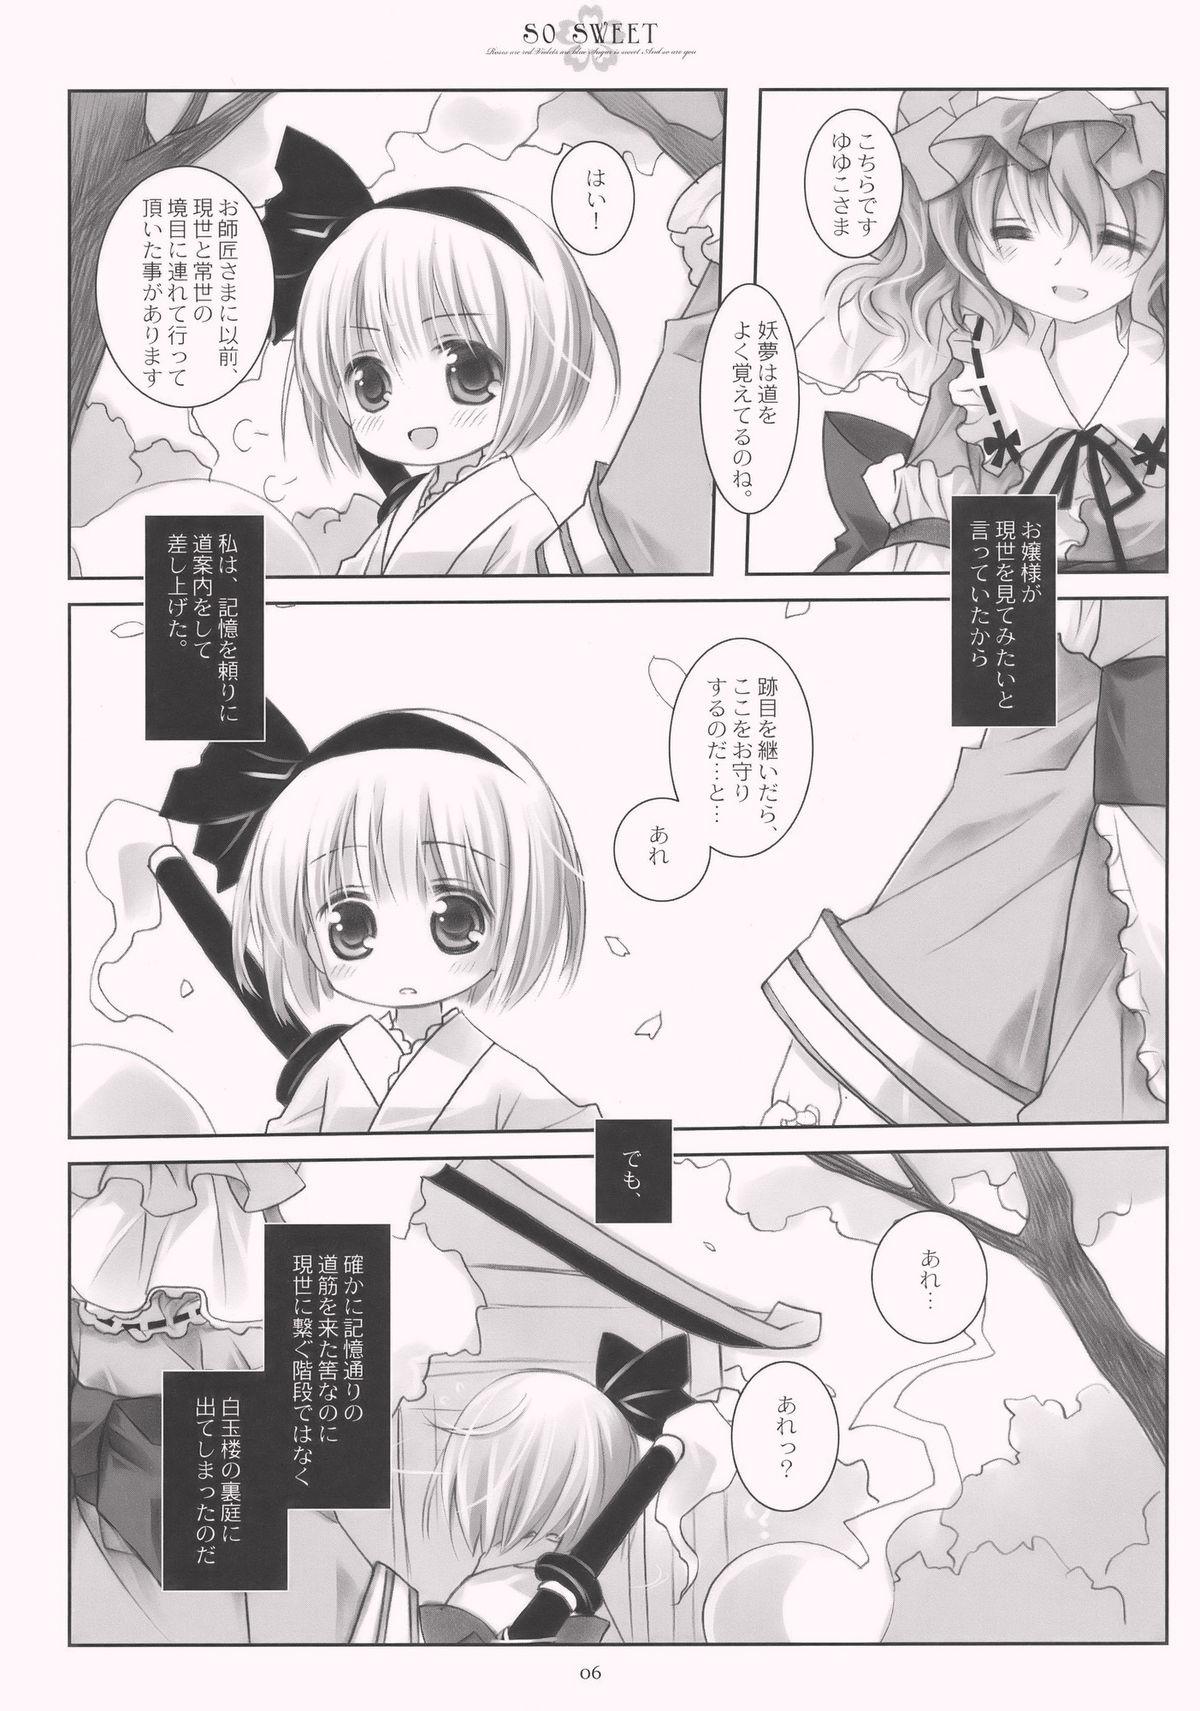 Gapes Gaping Asshole SO SWEET - Touhou project Free Fuck - Page 6